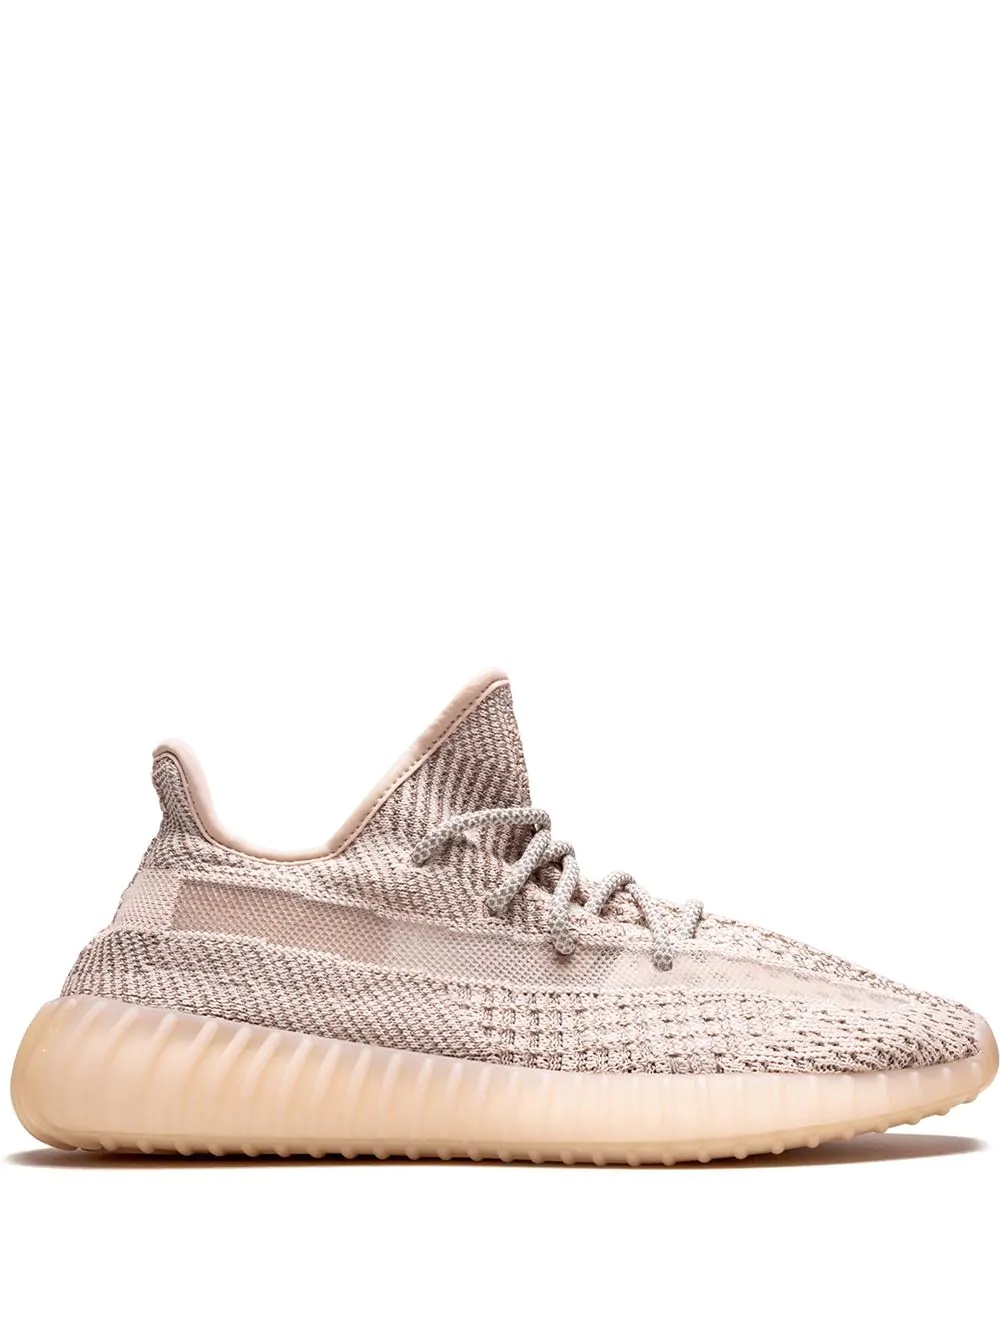 Yeezy Boost 350 V2 "Synth - Reflective" - 1